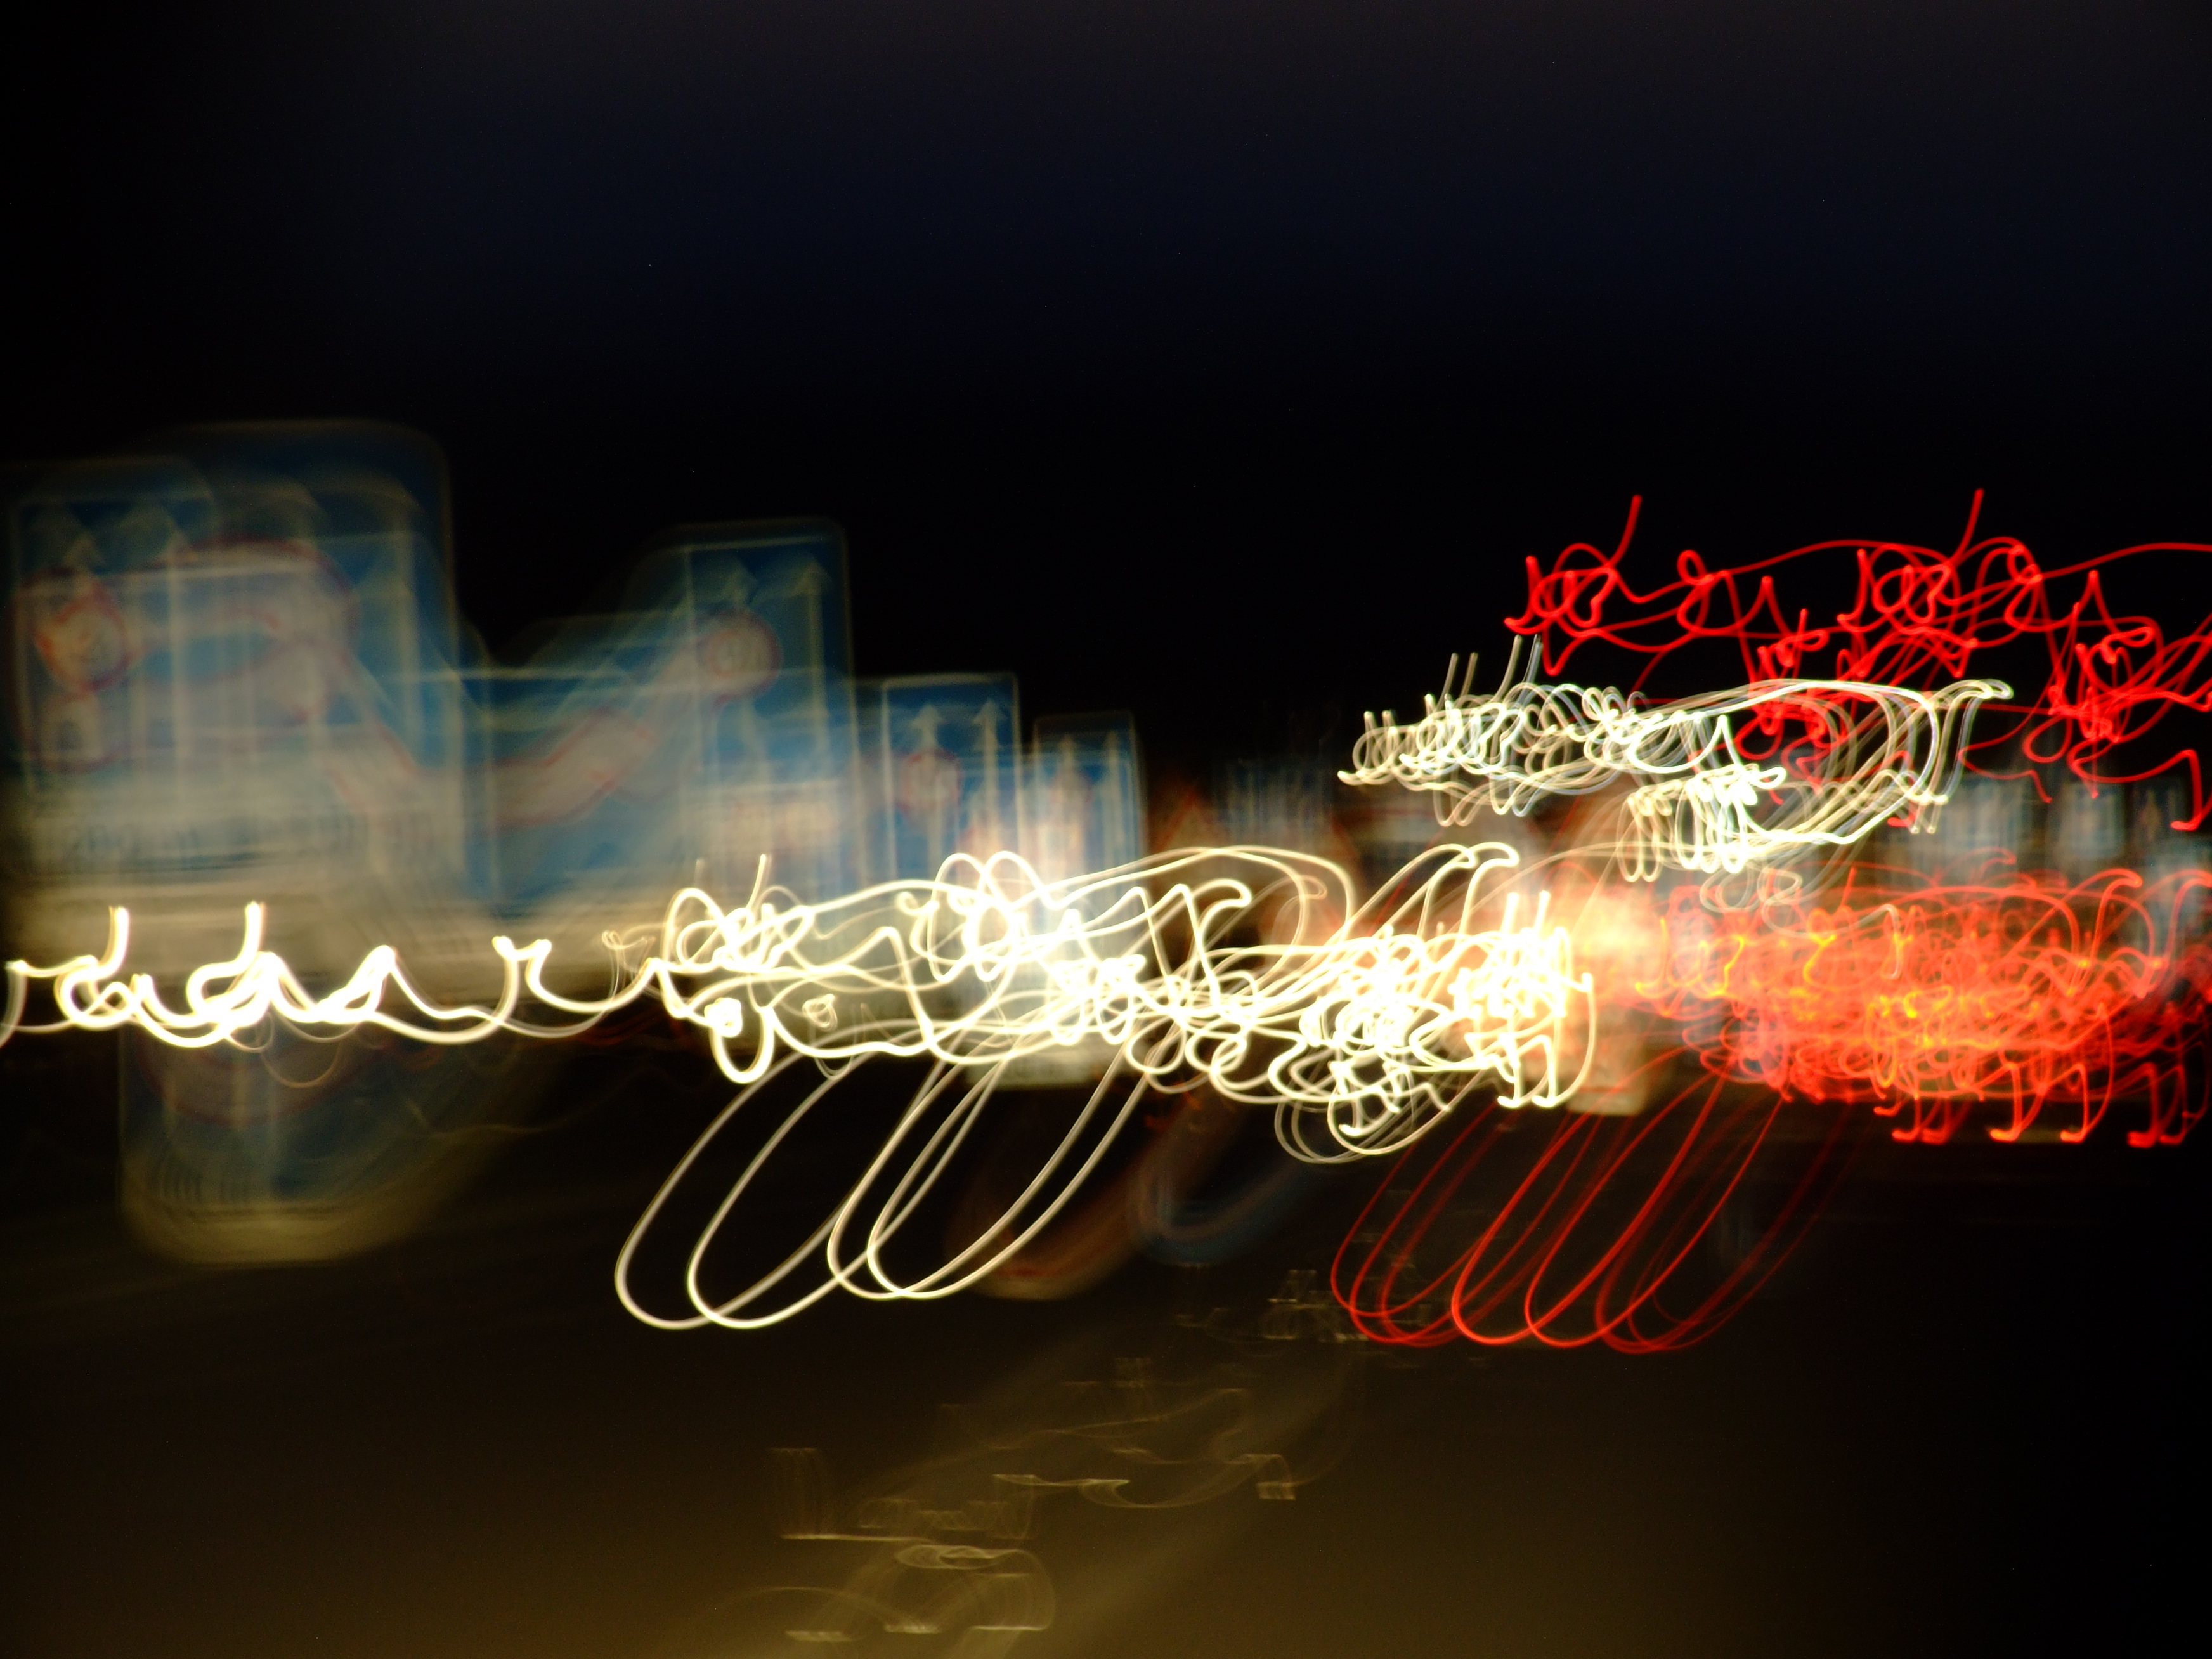 abstract, shine, light, blur, smooth, long exposure, freezelight Image for desktop